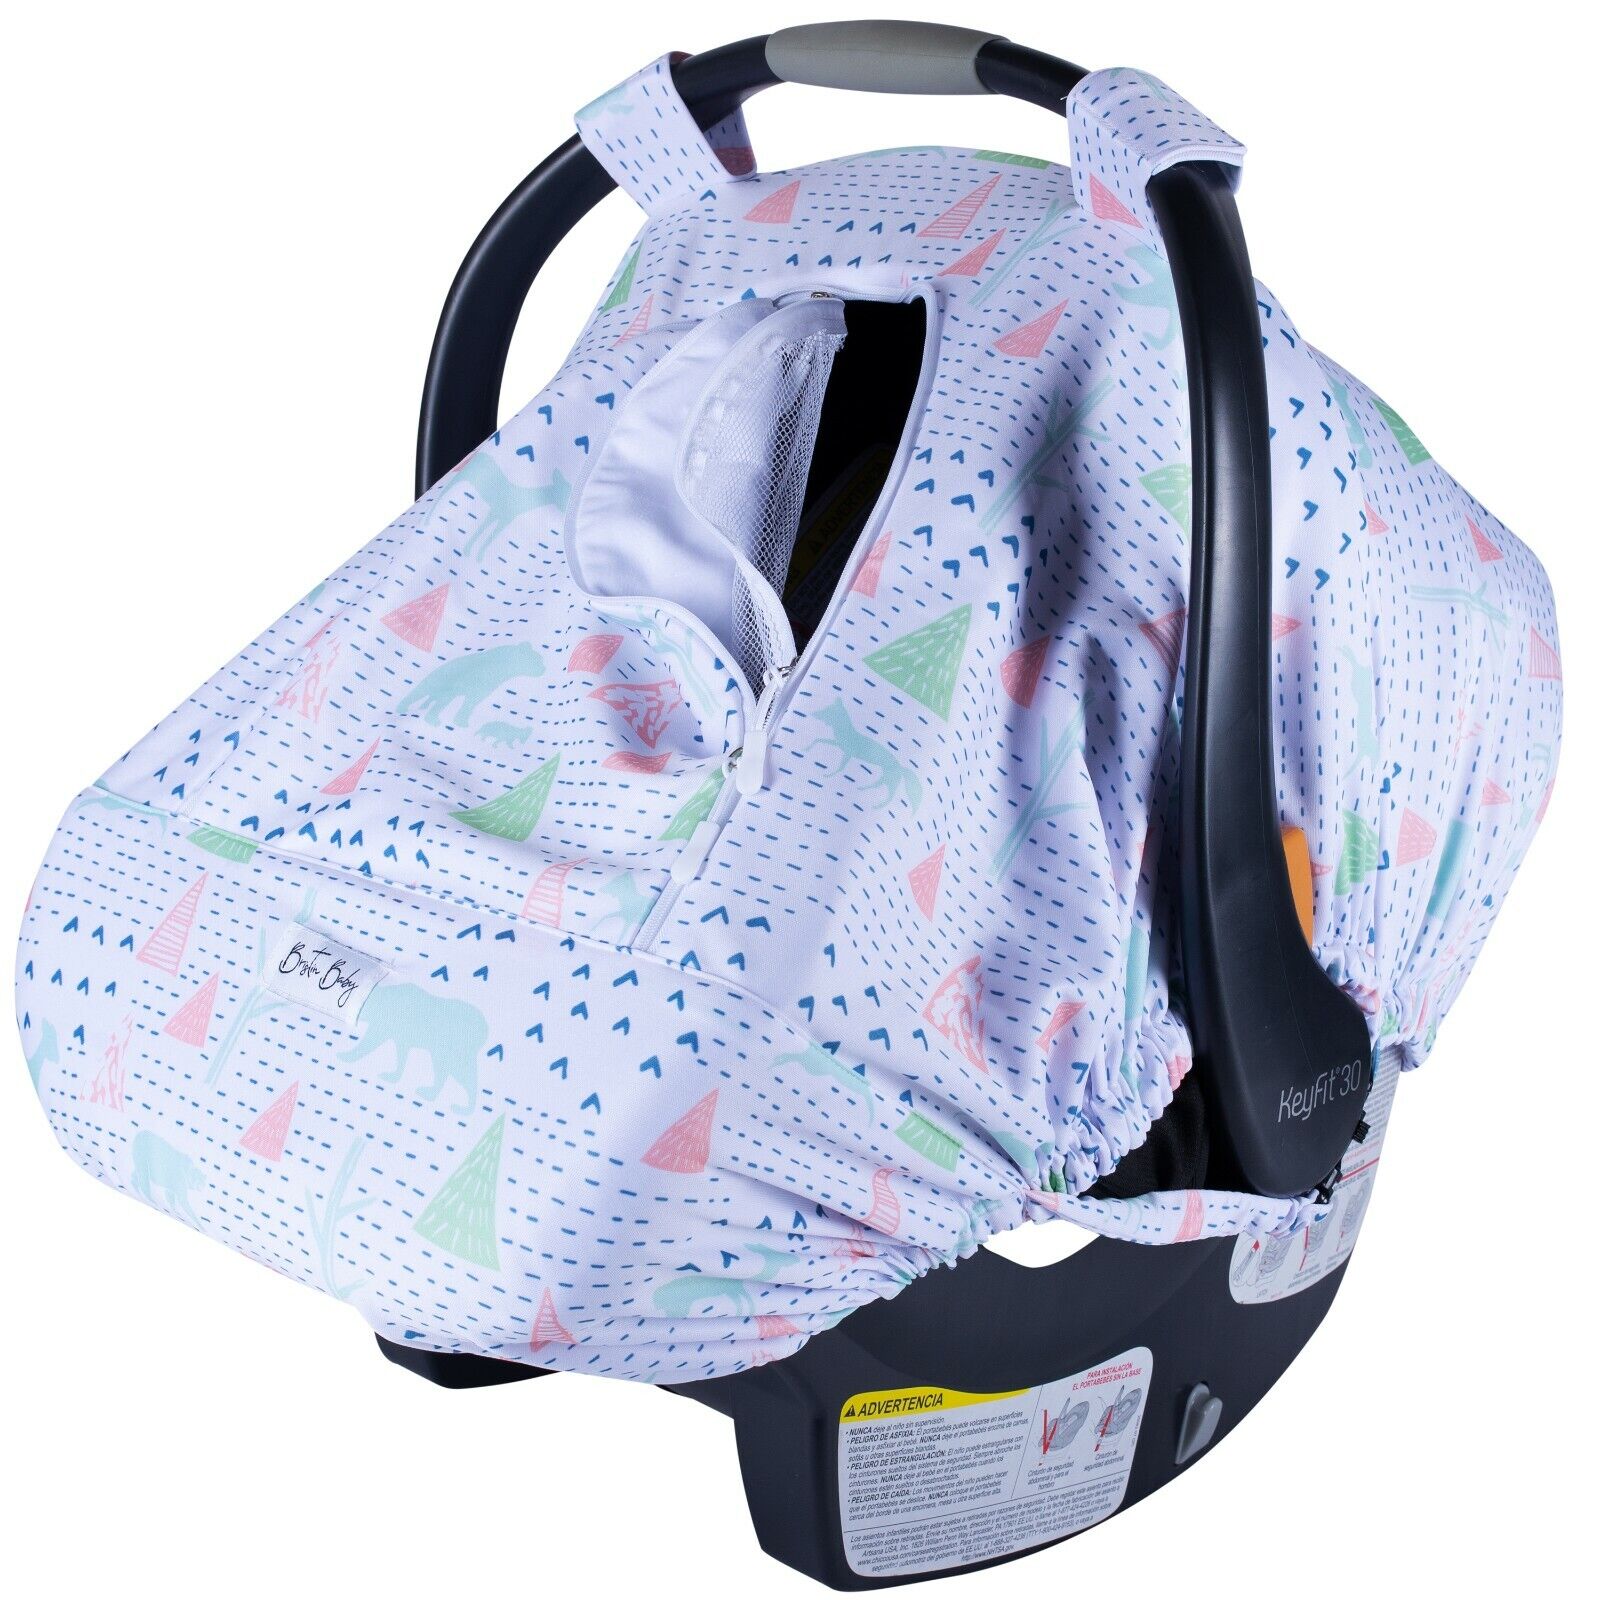 Bristin Baby Car Seat Canopy Stroller Cover for Infant Boy a